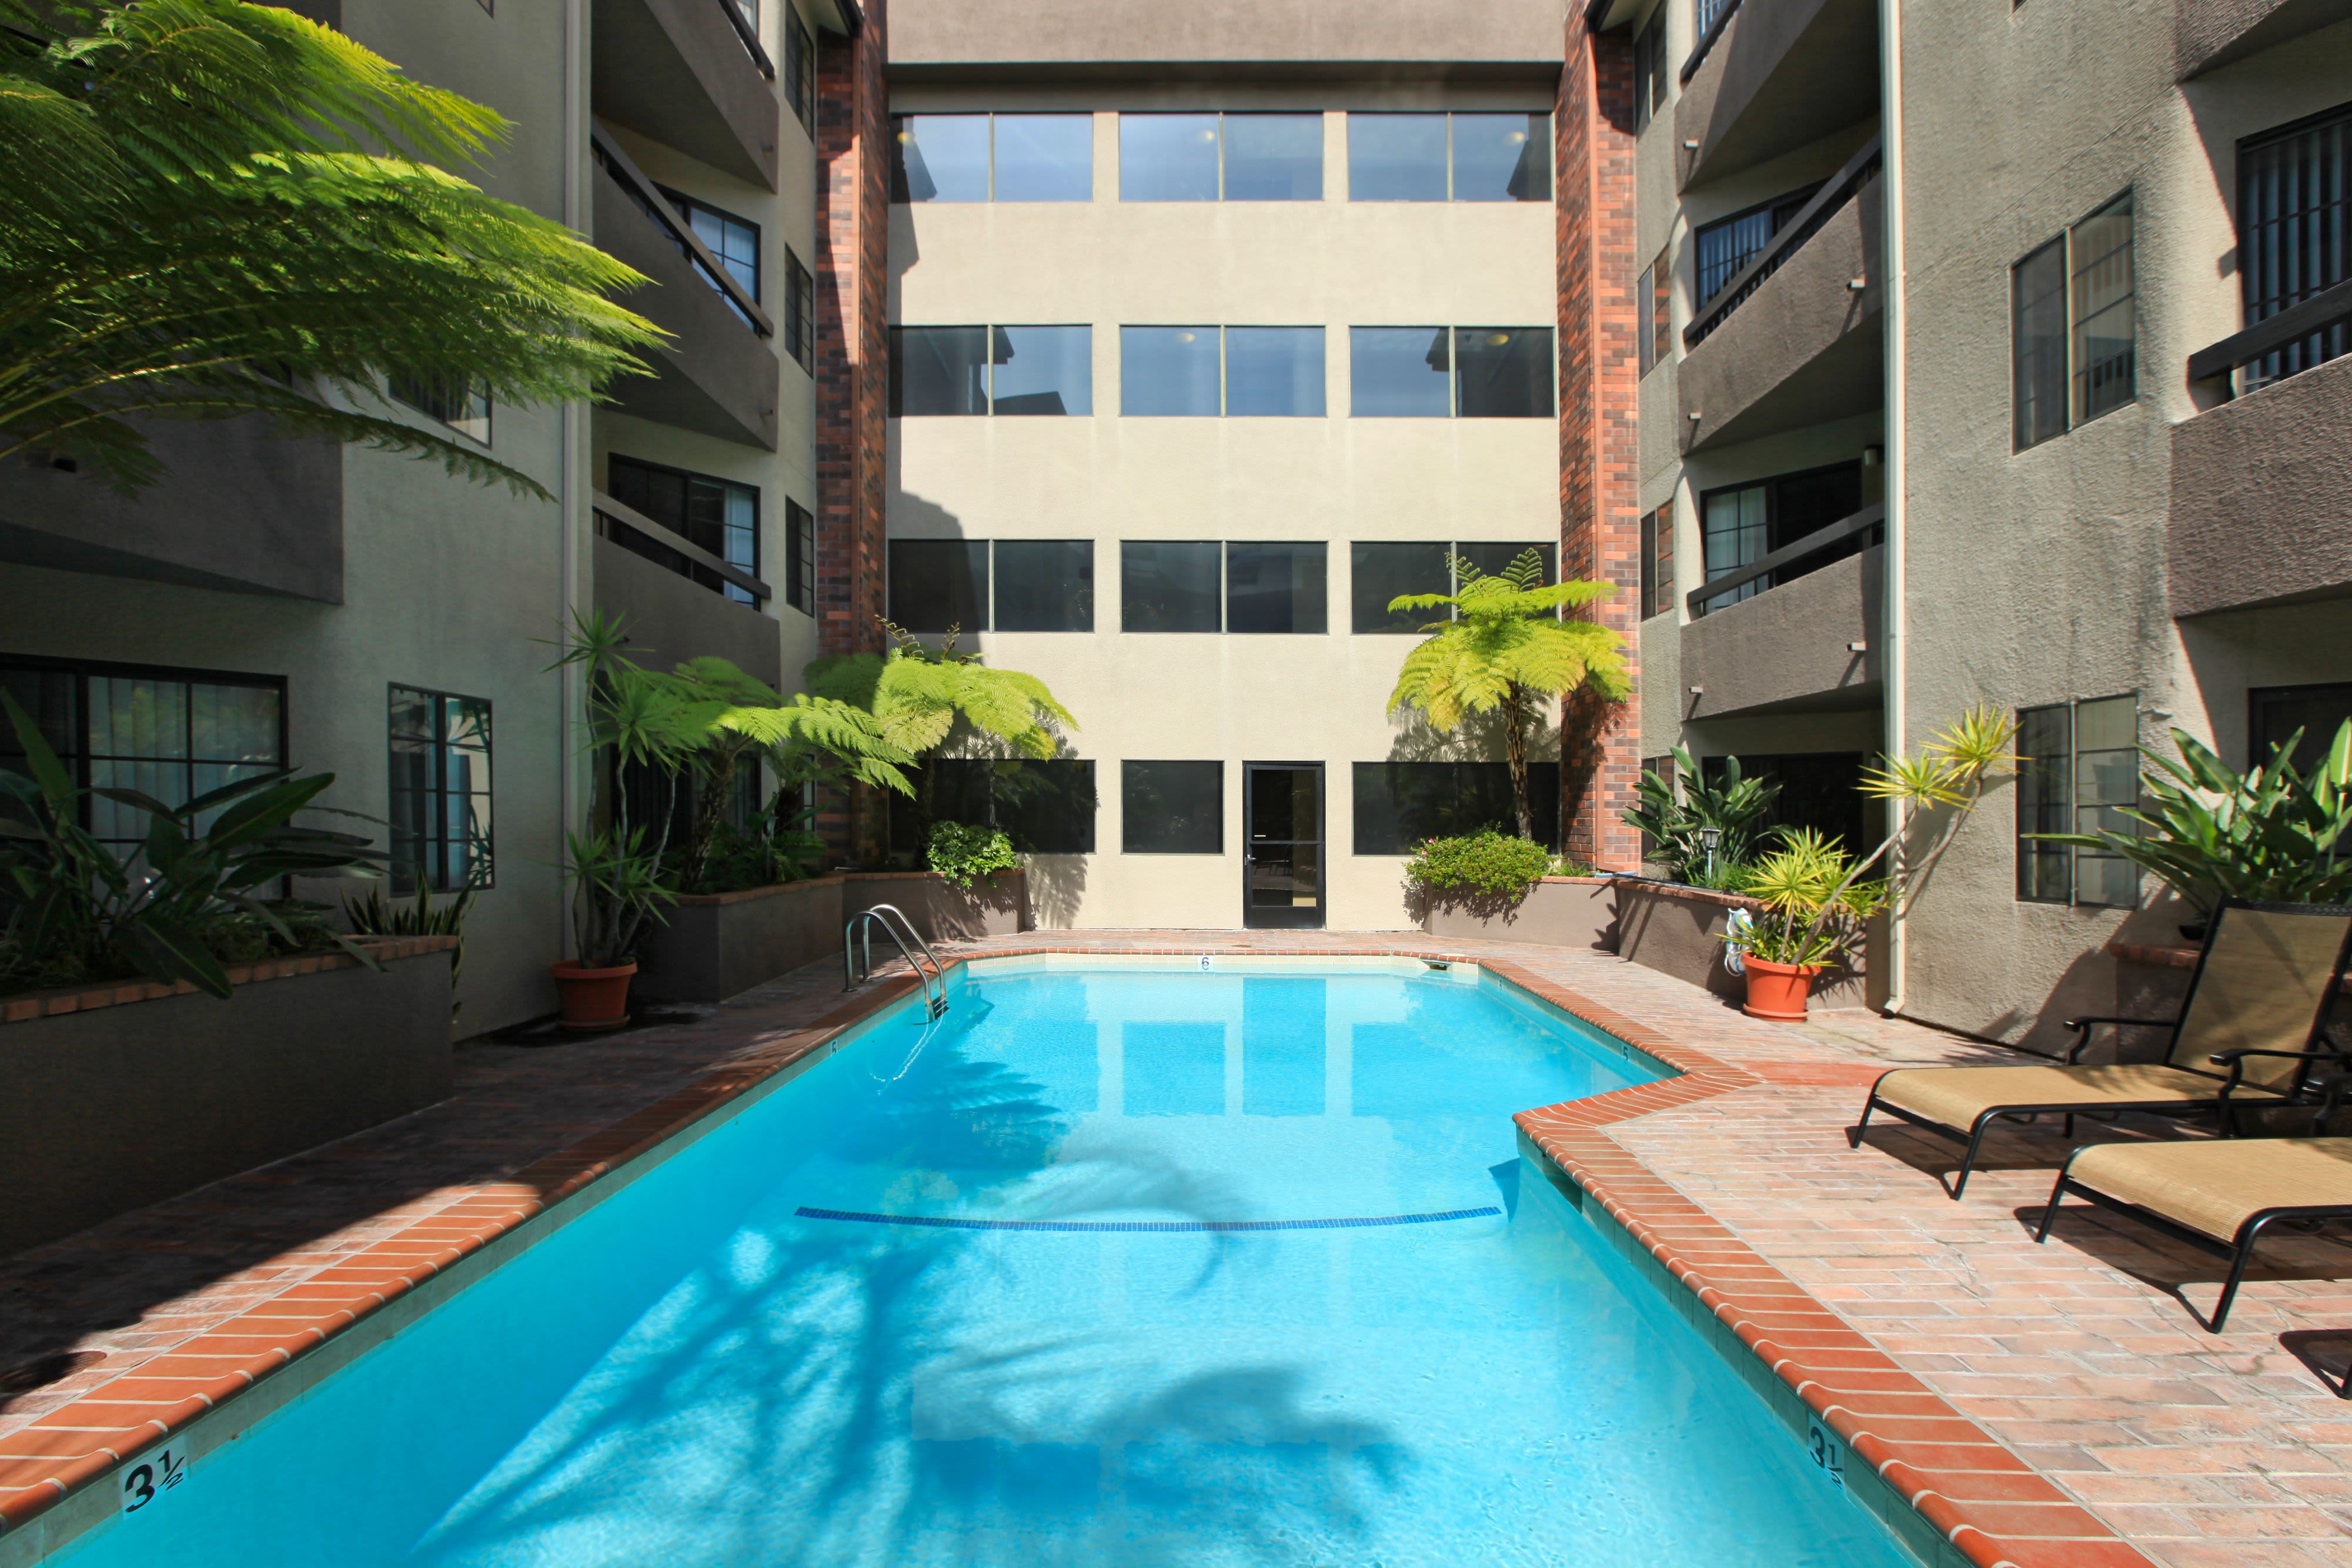 Sparkling pool with lounge chairs at Savoy West Apartments in Los Angeles, California